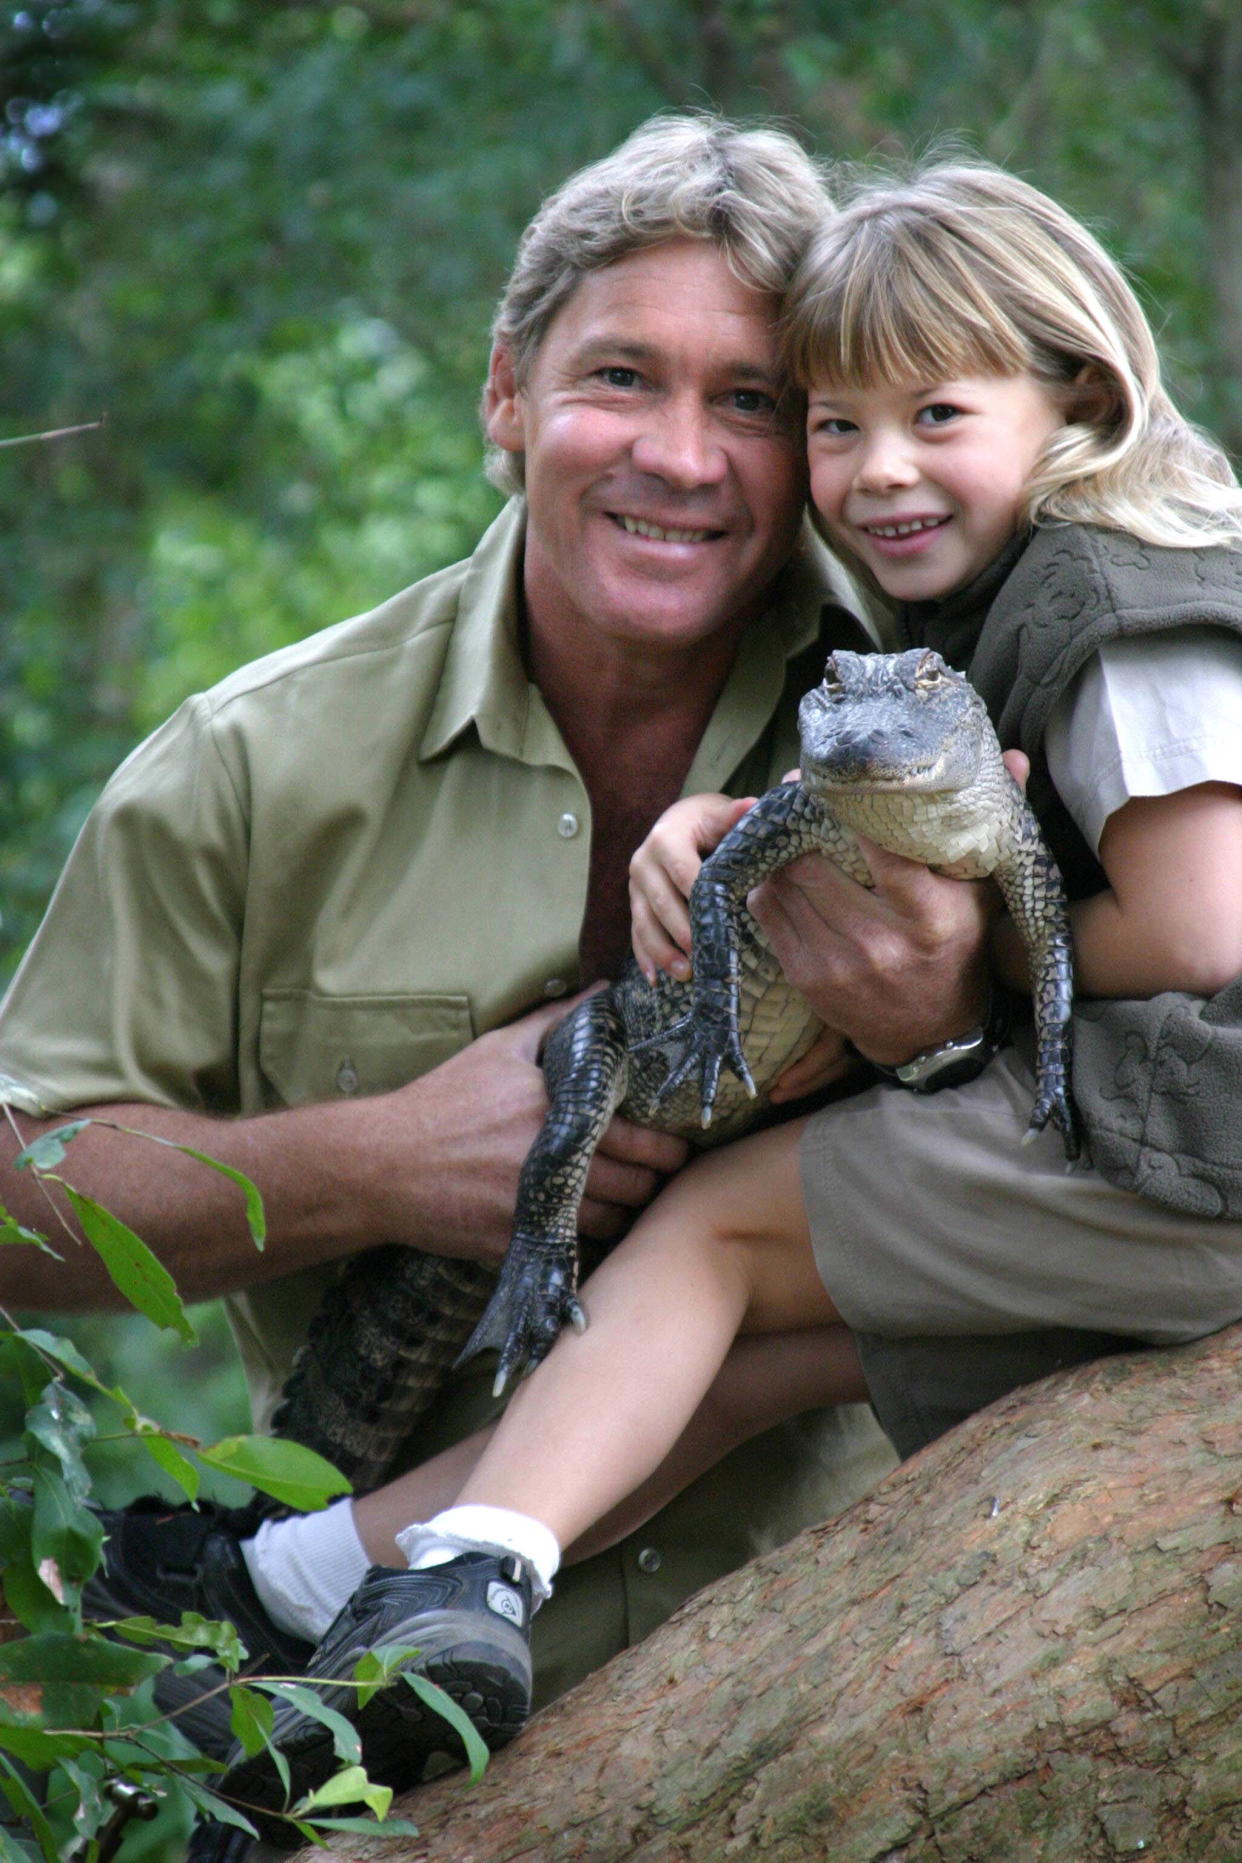 Steve Irwin in 2005 with his daughter, Bindi, and a 3-year-old alligator named Russ at Australia Zoo. (Photo: Newspix/Getty Images)